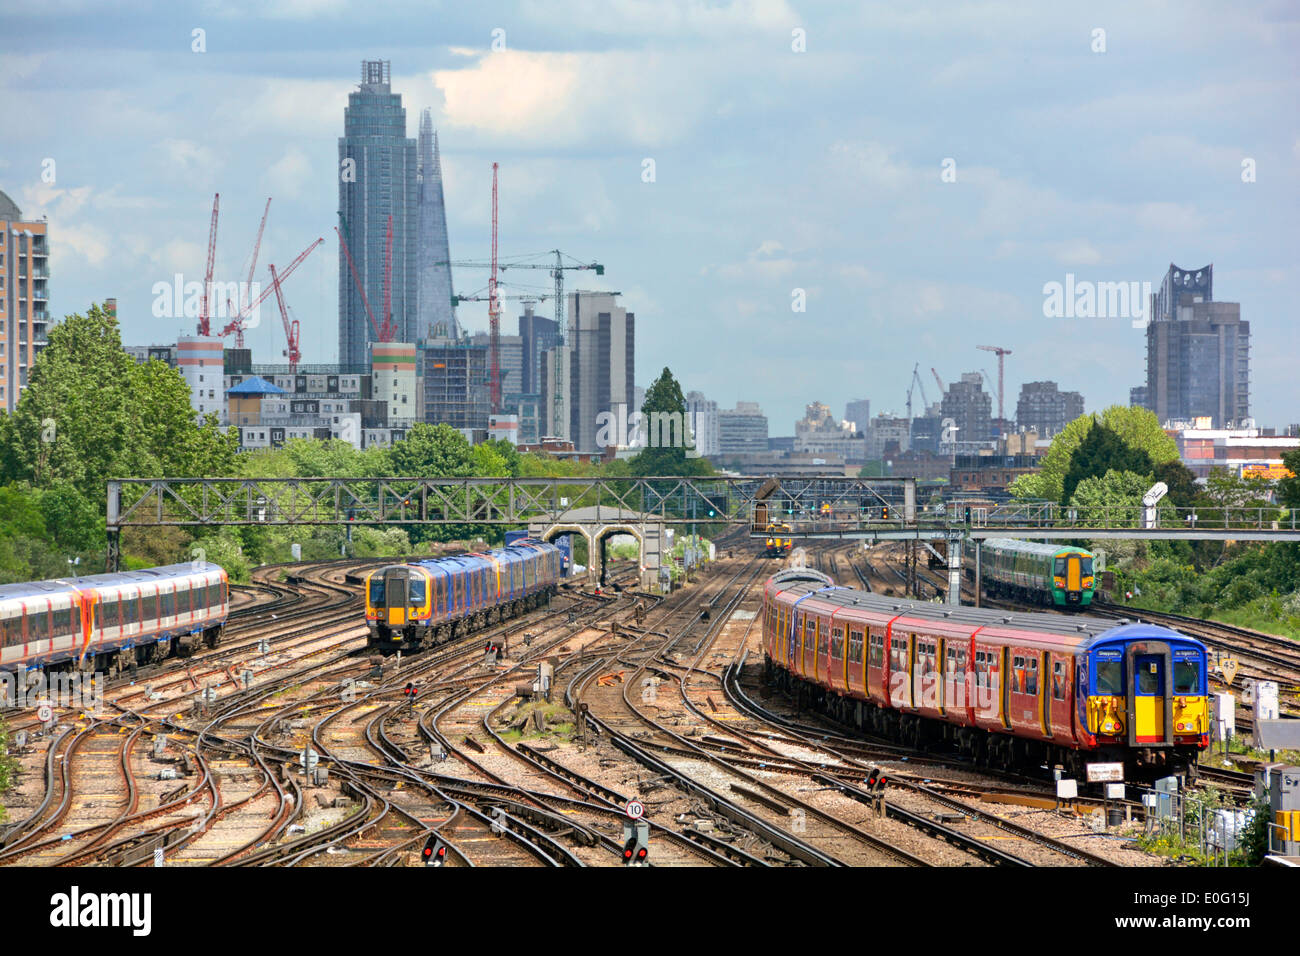 Busy Clapham Junction public transport trains and tracks with St Georges Tower Vauxhall and Shard landmarks on the London skyline beyond England UK Stock Photo